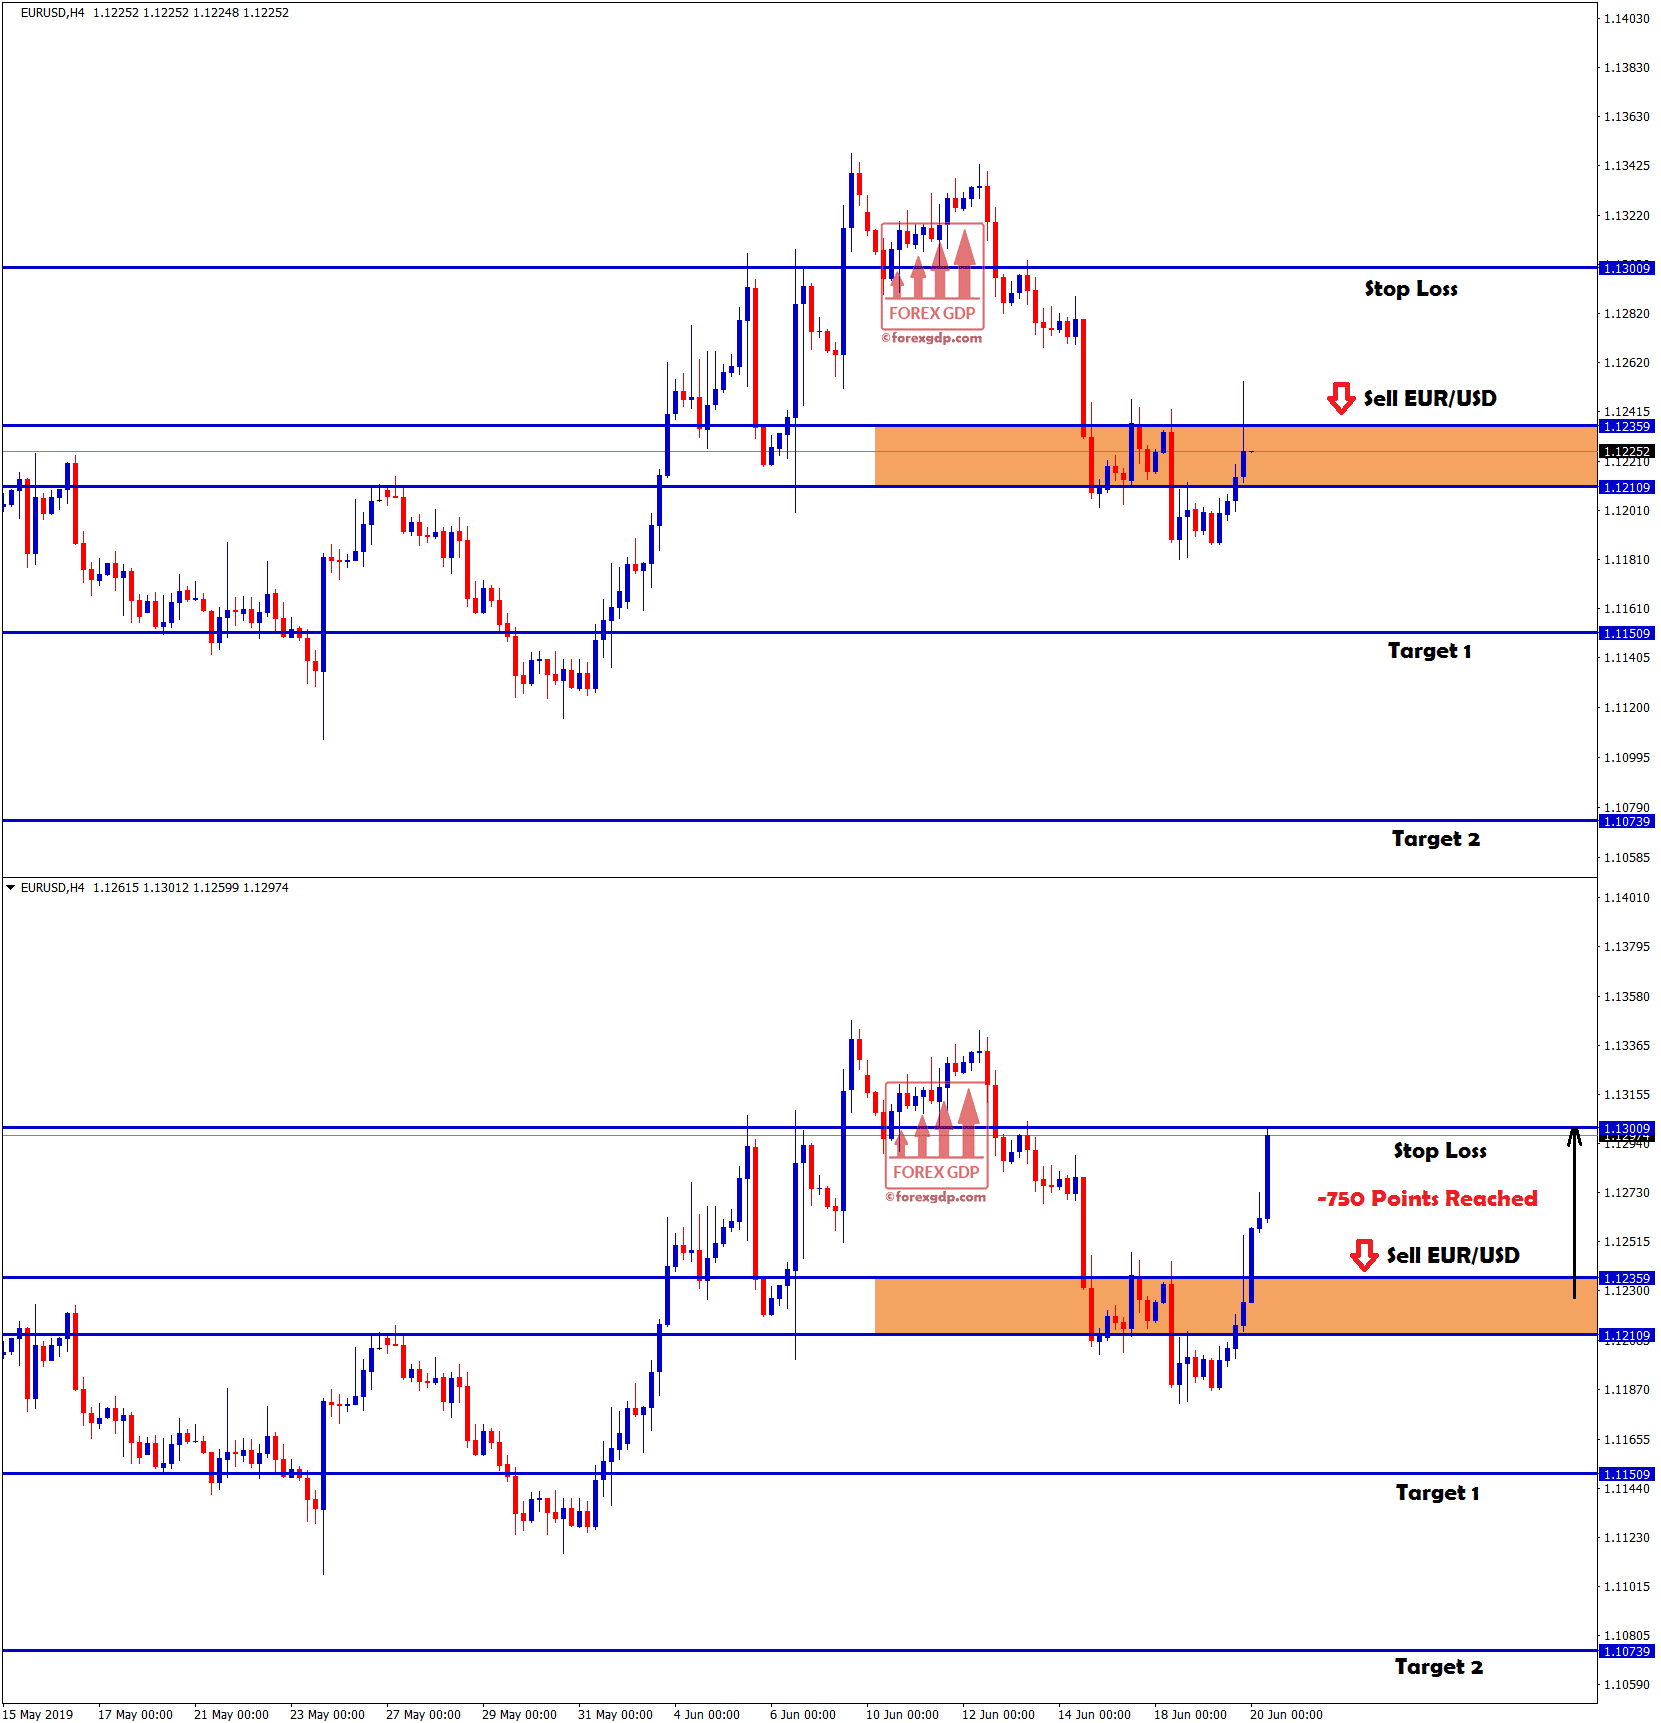 Stop loss hit with -750 points in eur/usd sell signal